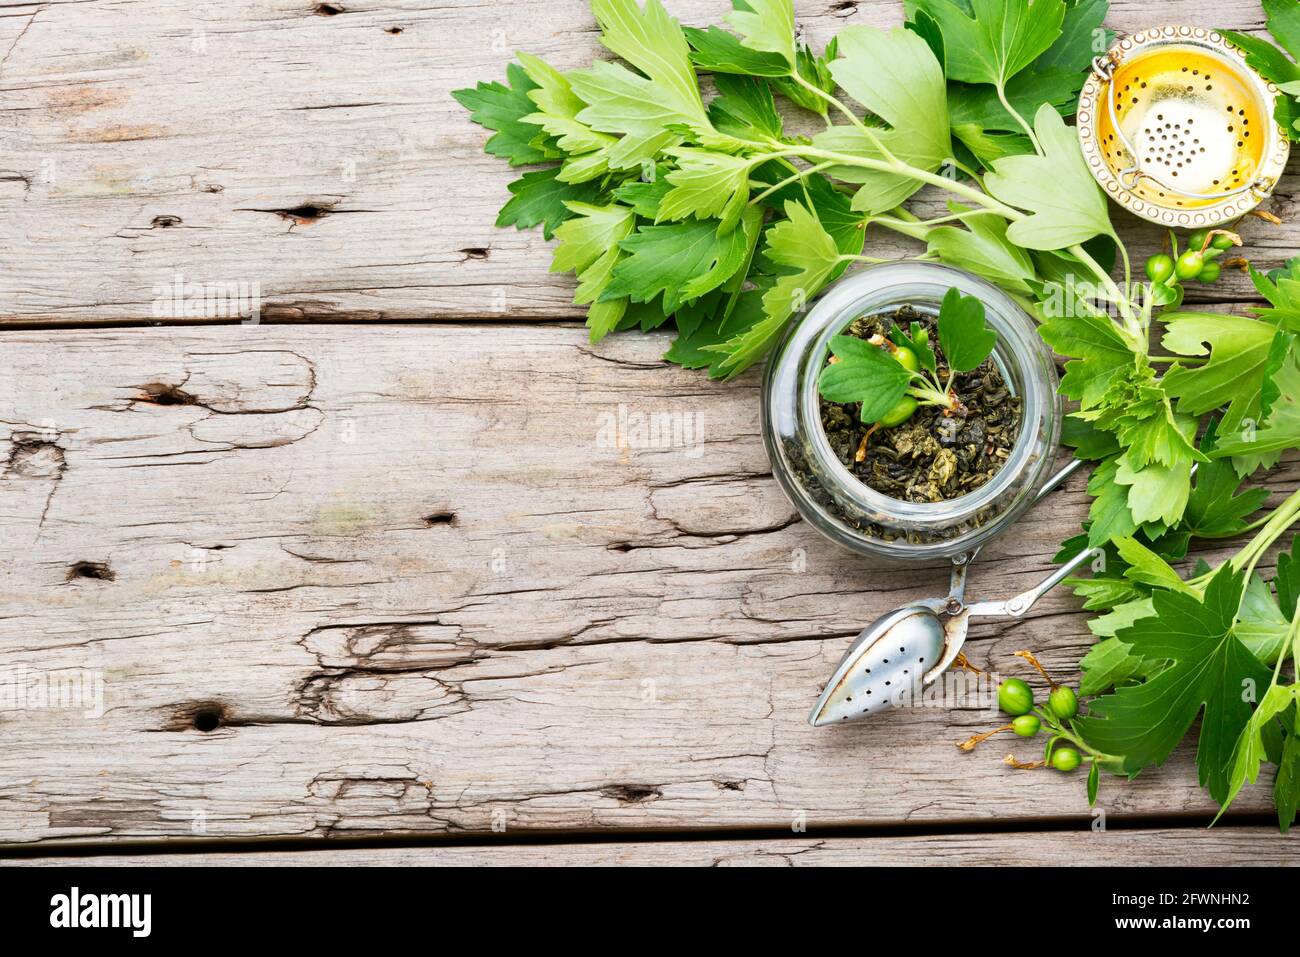 Herbal tea with fresh currant foliage.Herbal medicine.Copy space Stock Photo